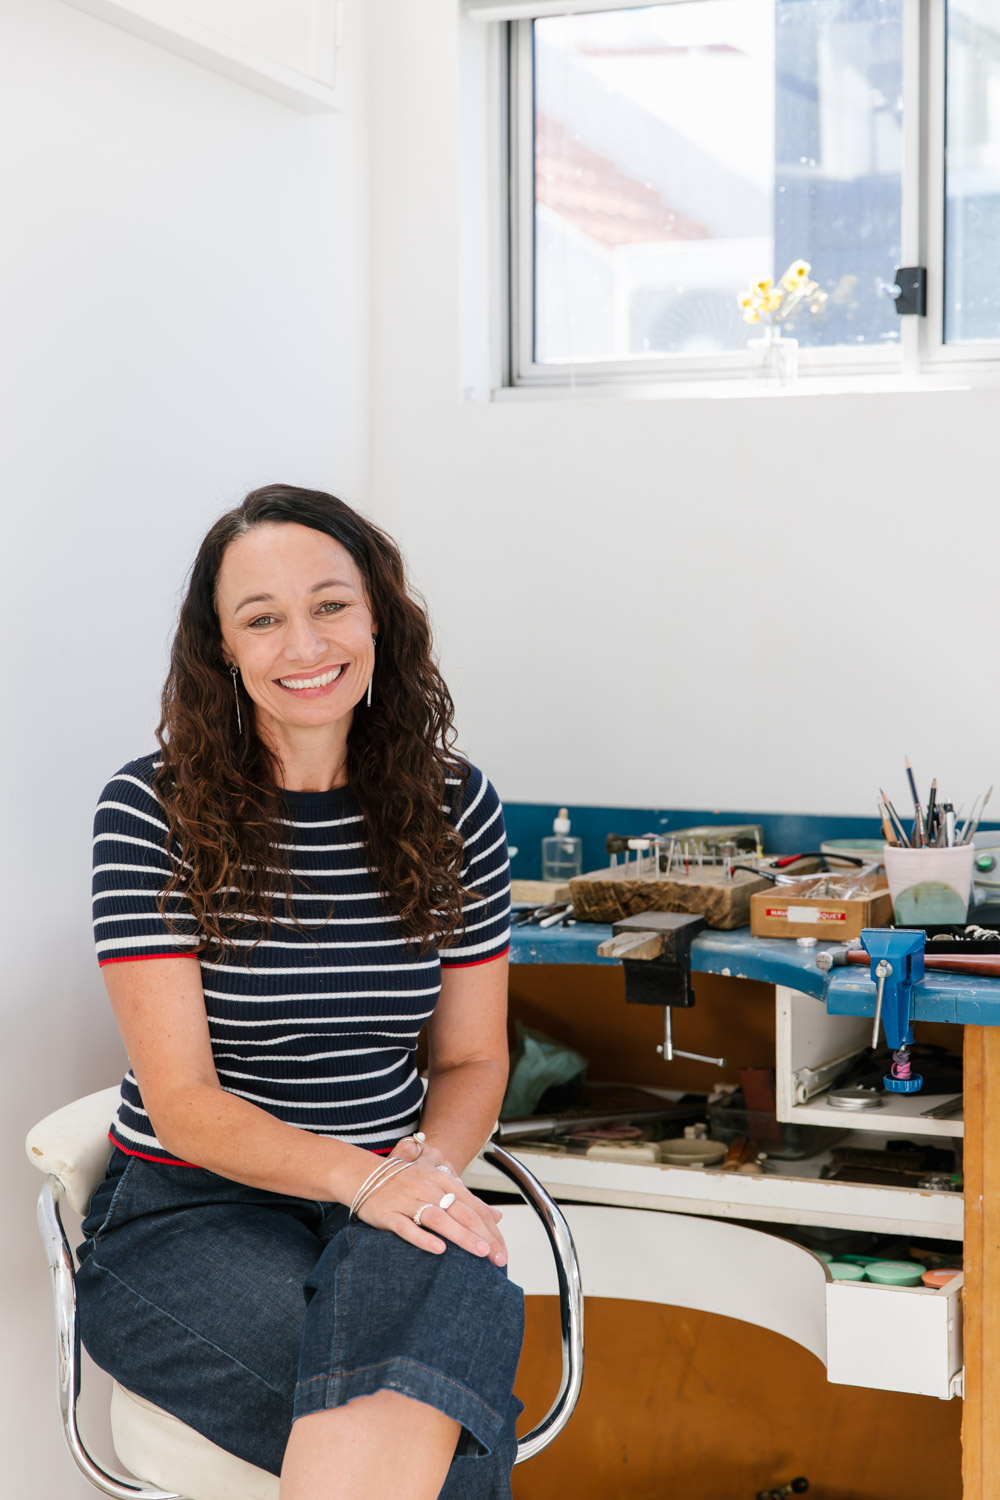 White woman with curly brown hair sits at her jewellers workbench, smiling at the camera and wearing a navy and white striped top and denim pants